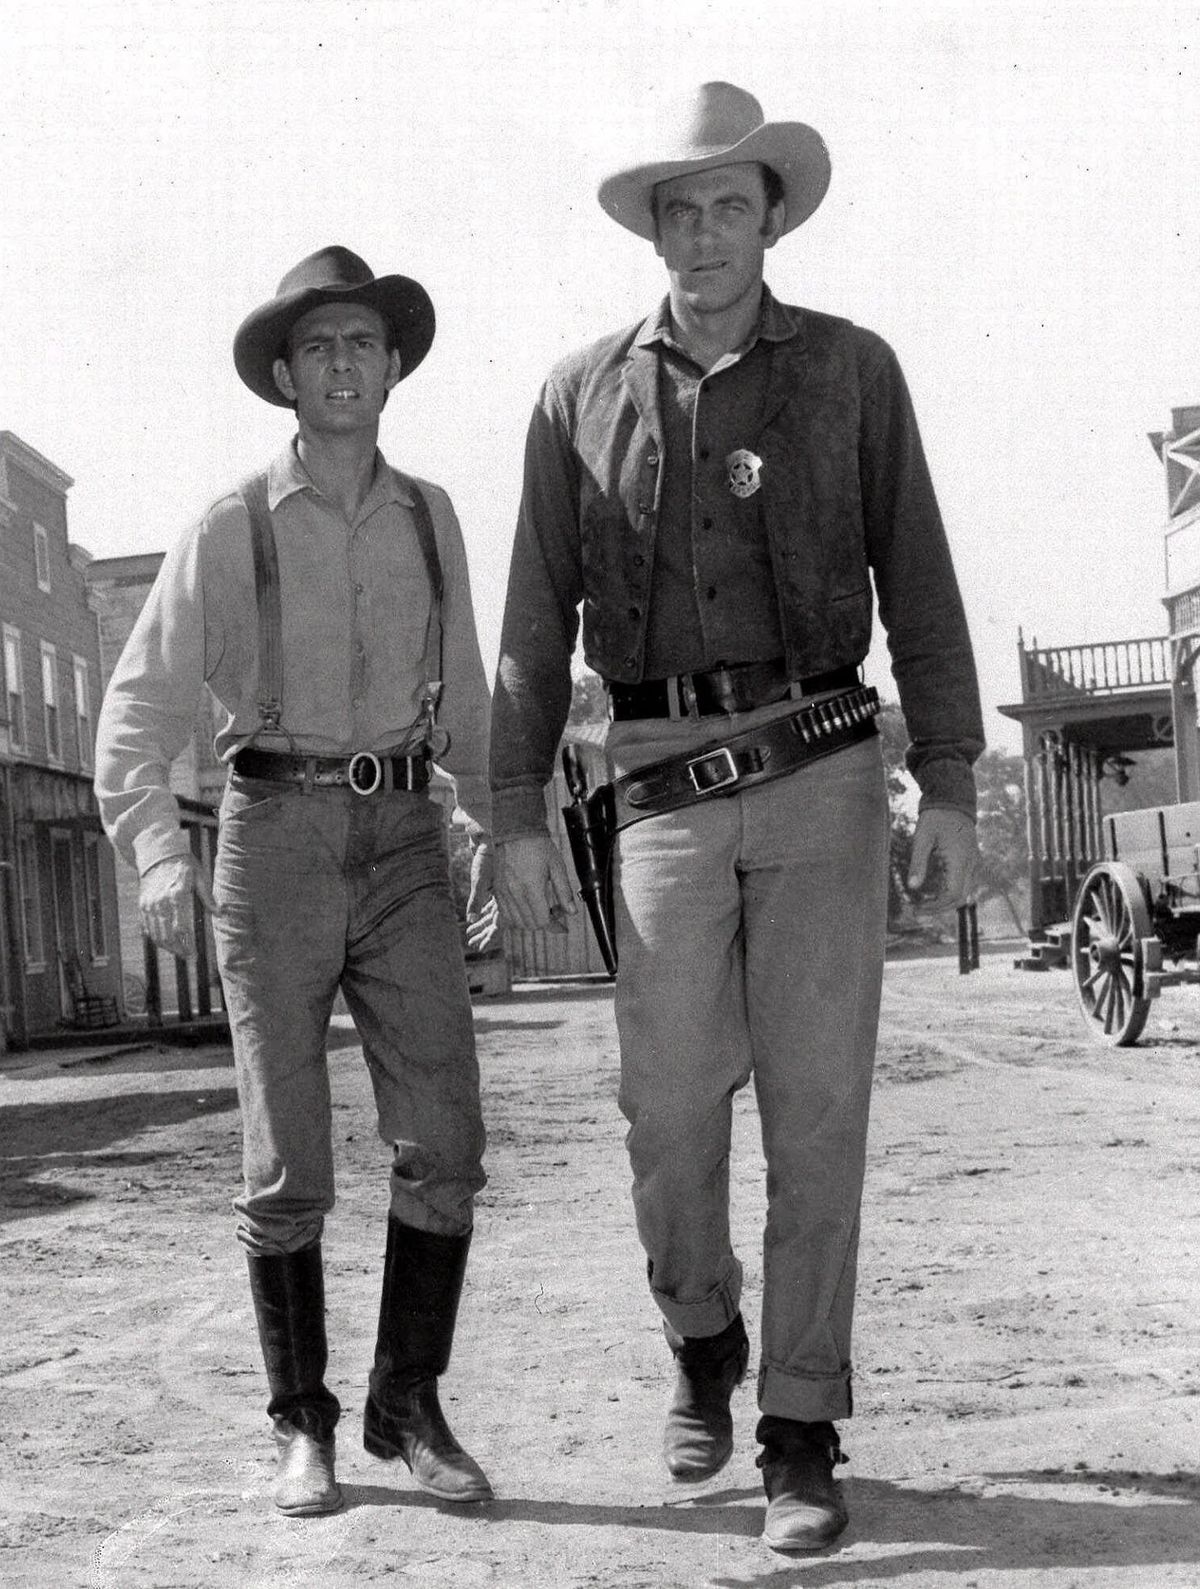 ** FILE ** This 1956 file photo shows actors Dennis Weaver, left, as the slow-witted deputy Chester and James Arness as Marshall Matt Dillon, are shown in a scene from CBS